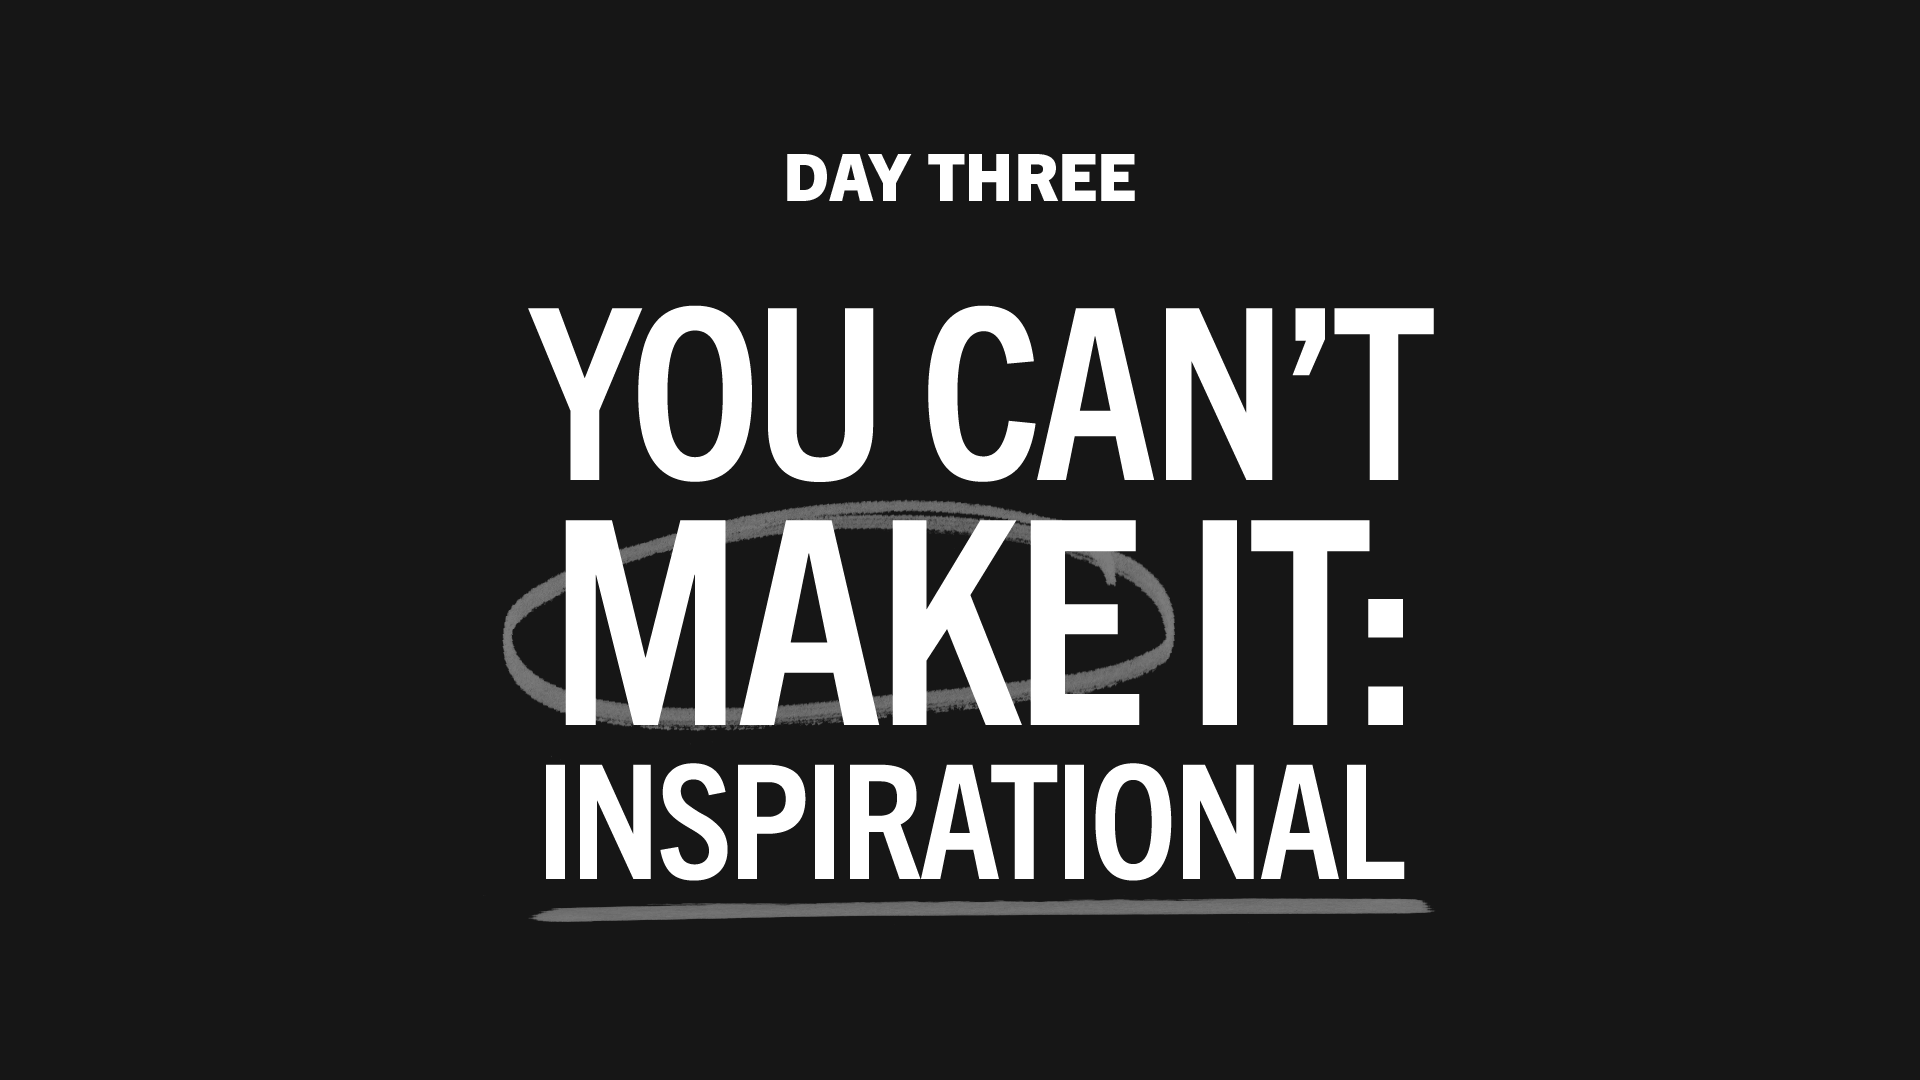 Day 3: You Can't Make It - Inspirational